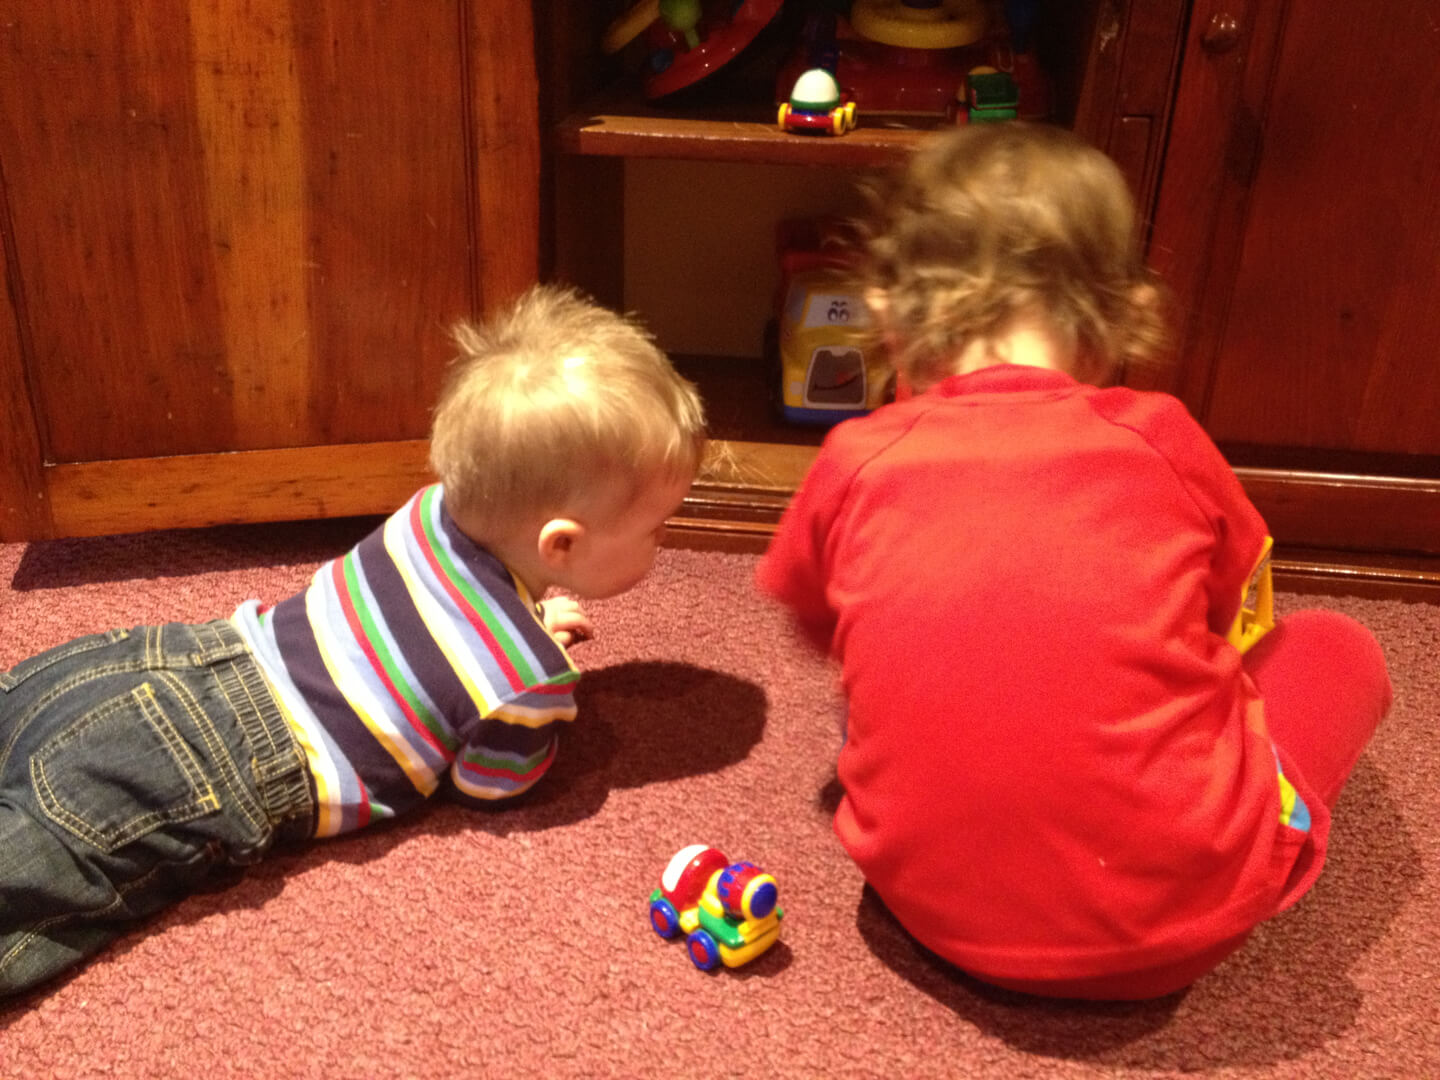 Two kids playing with toy cars